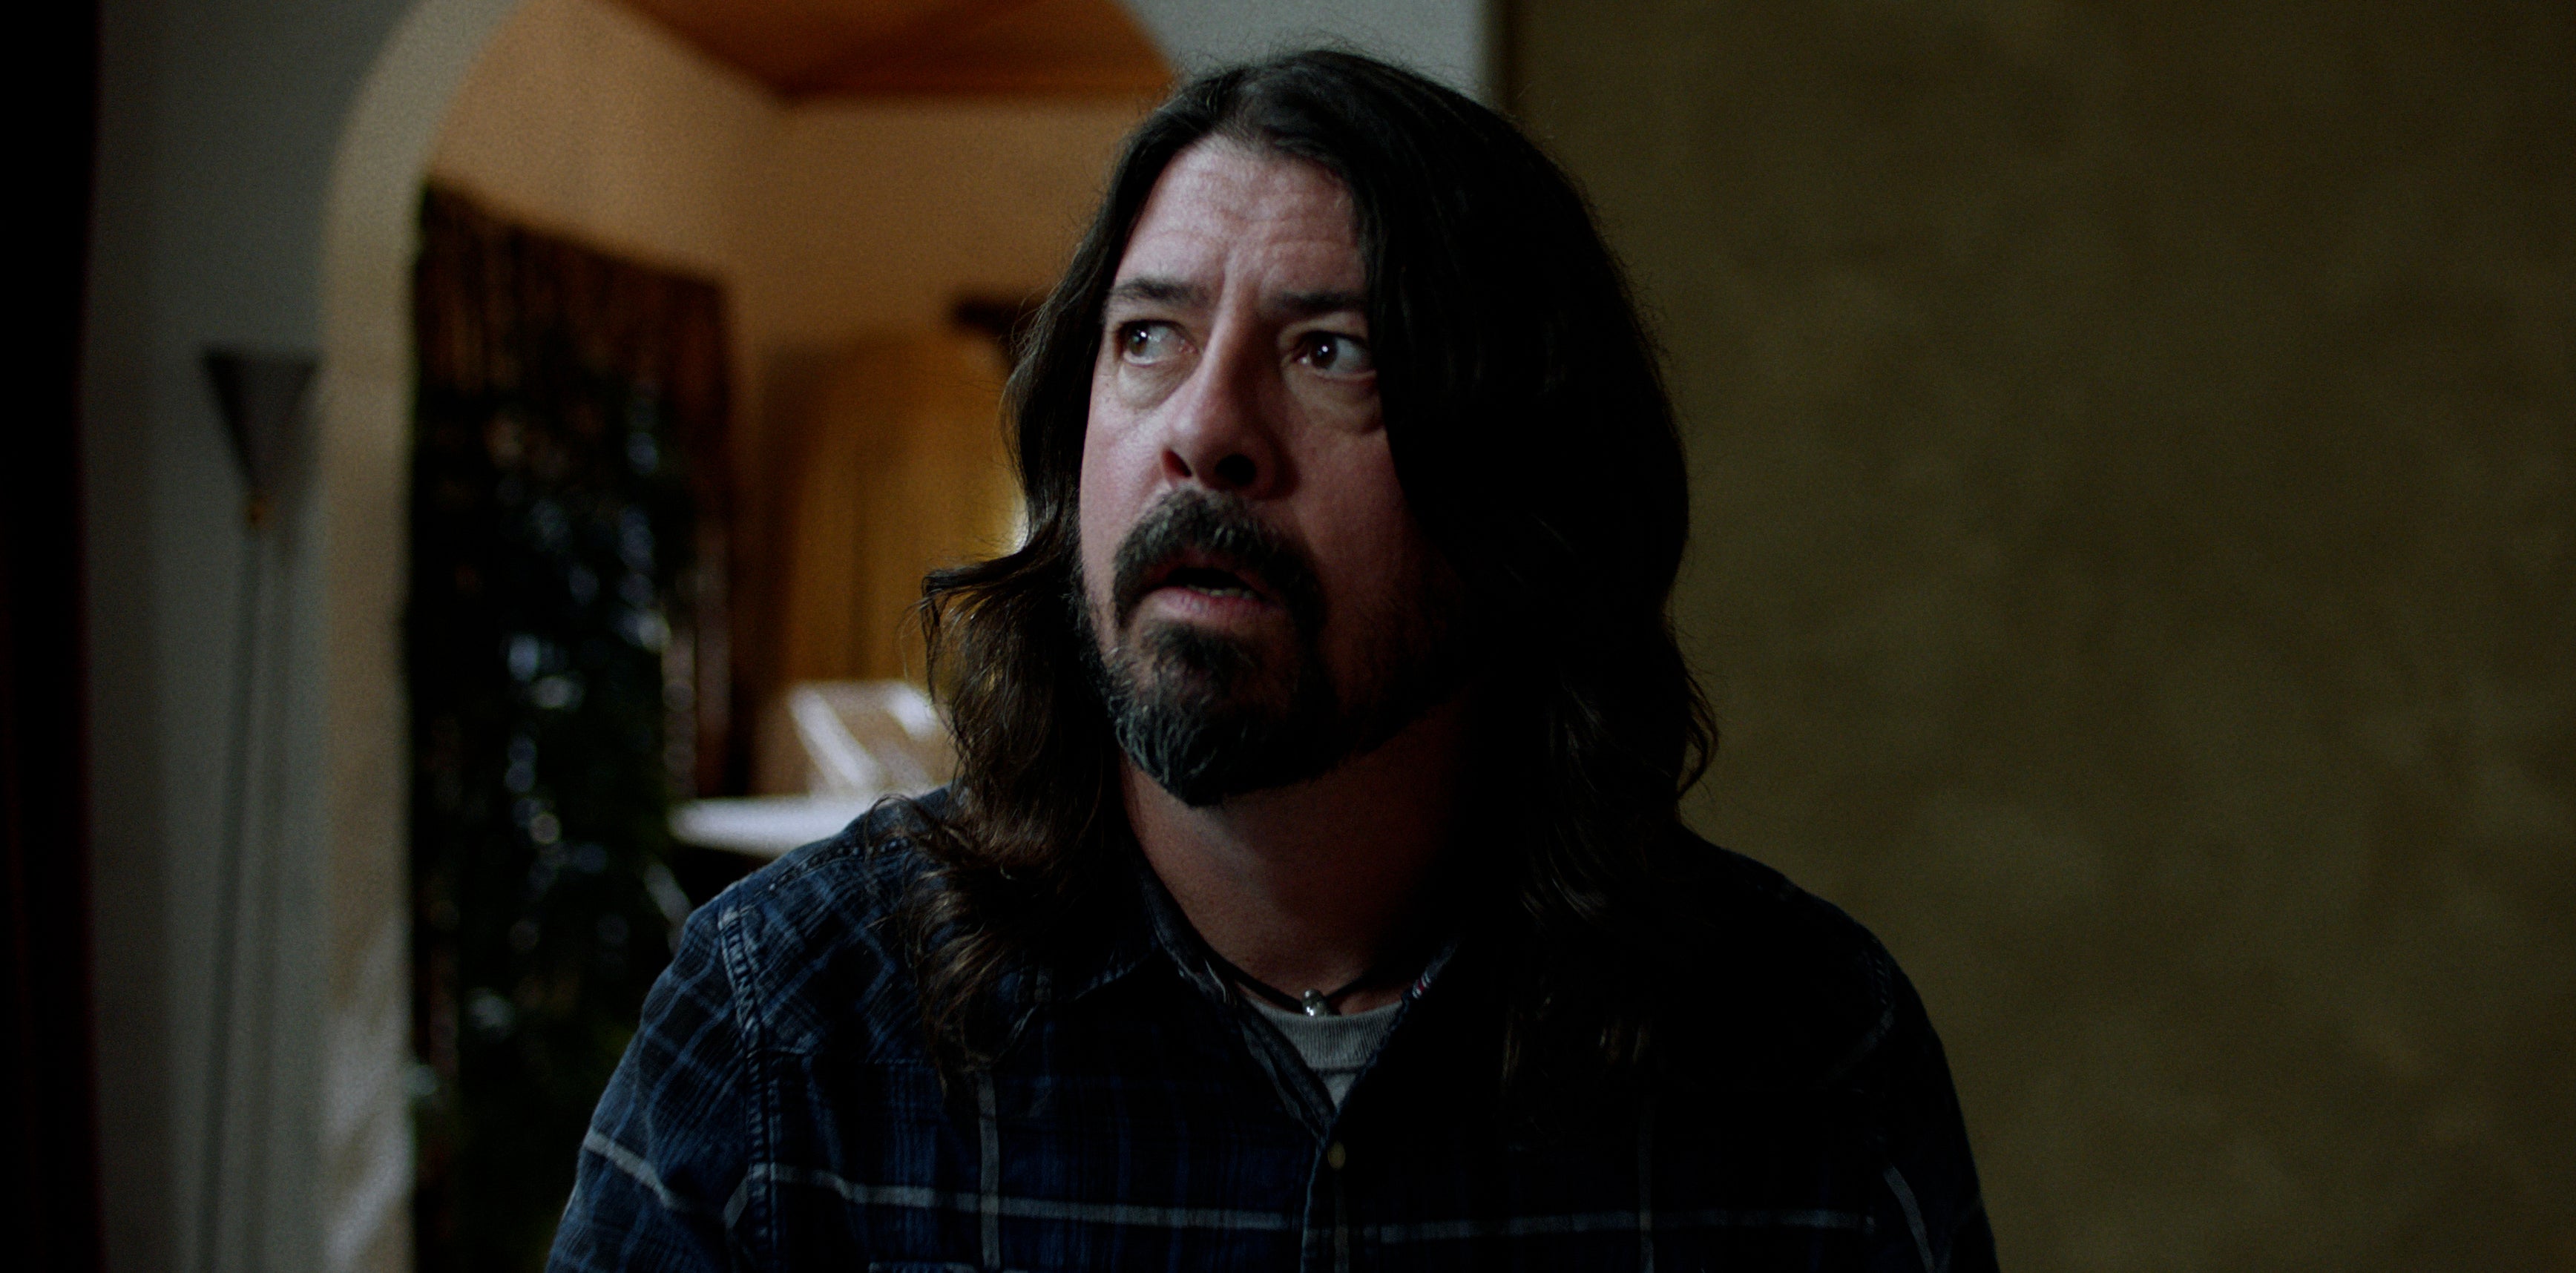 Grohl’s film takes inspiration from Seventies shockers